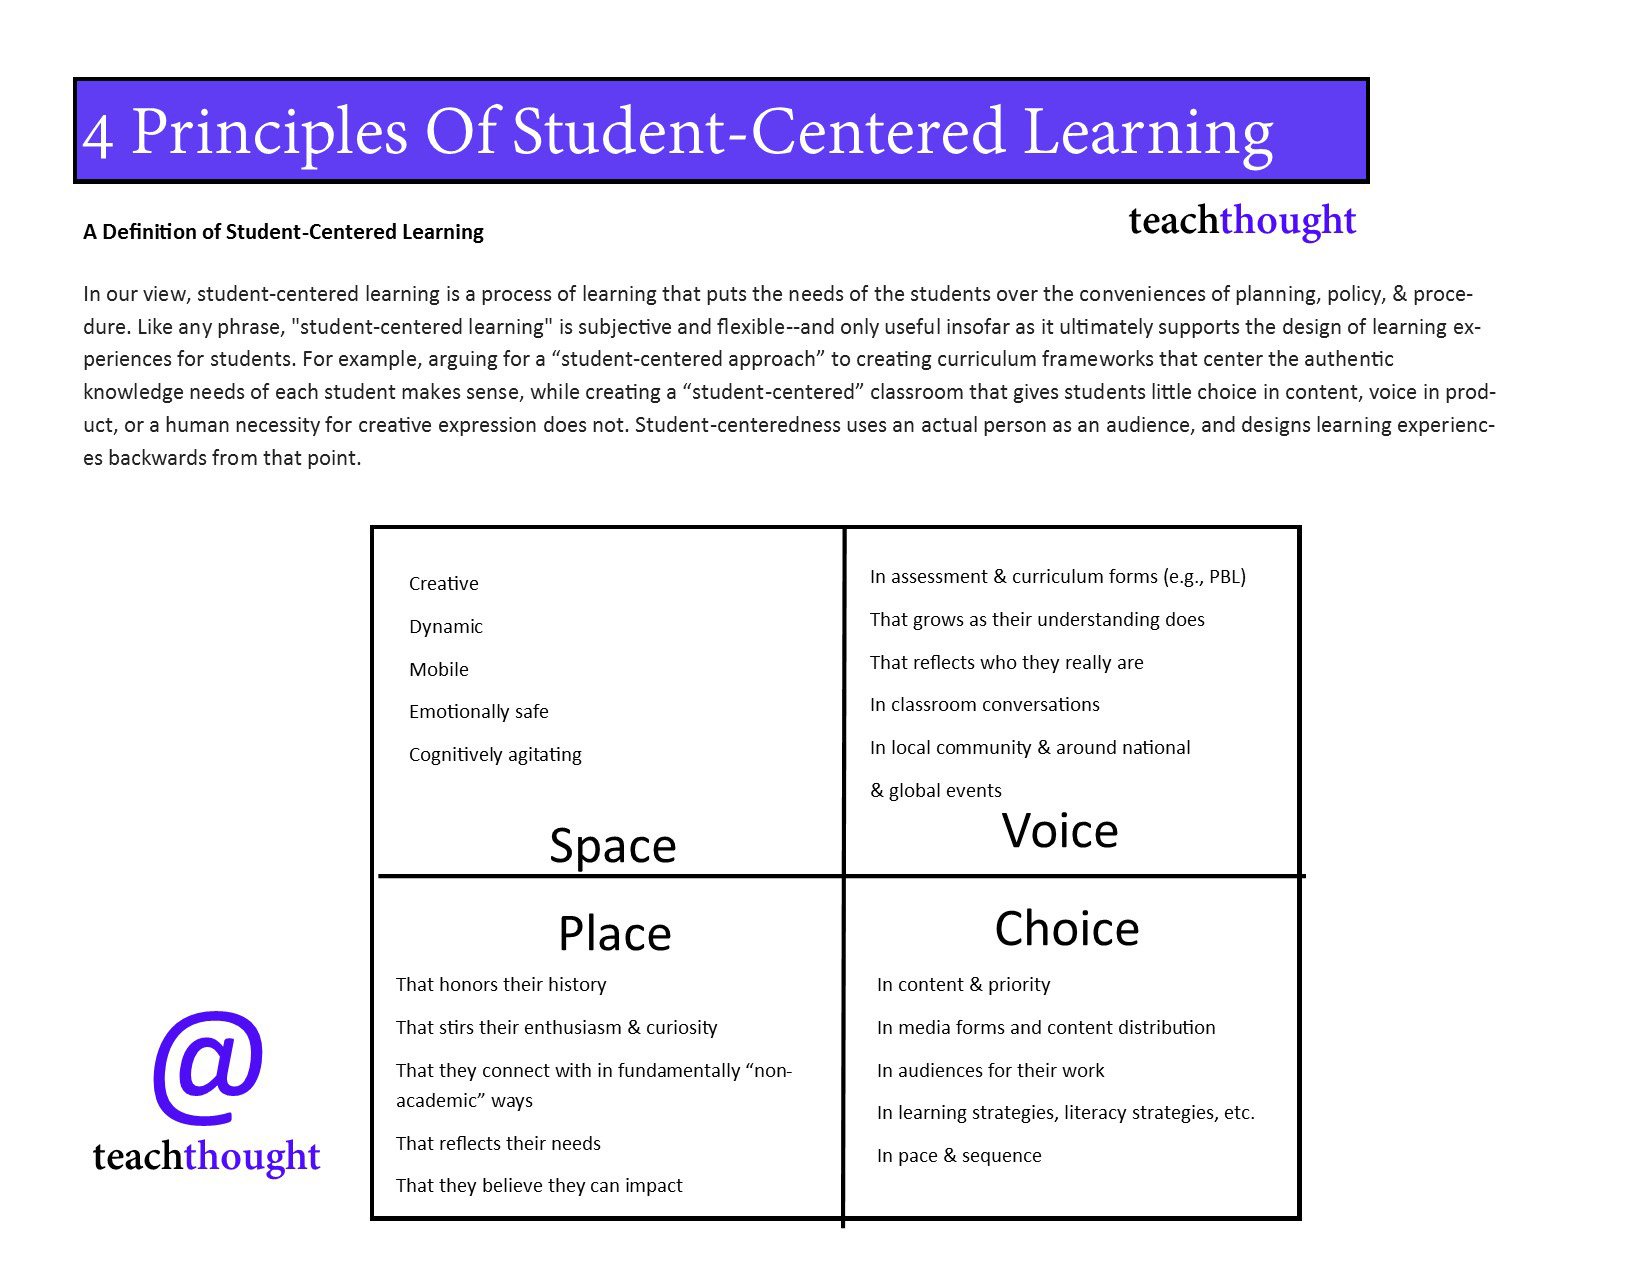 student-centered learning principles